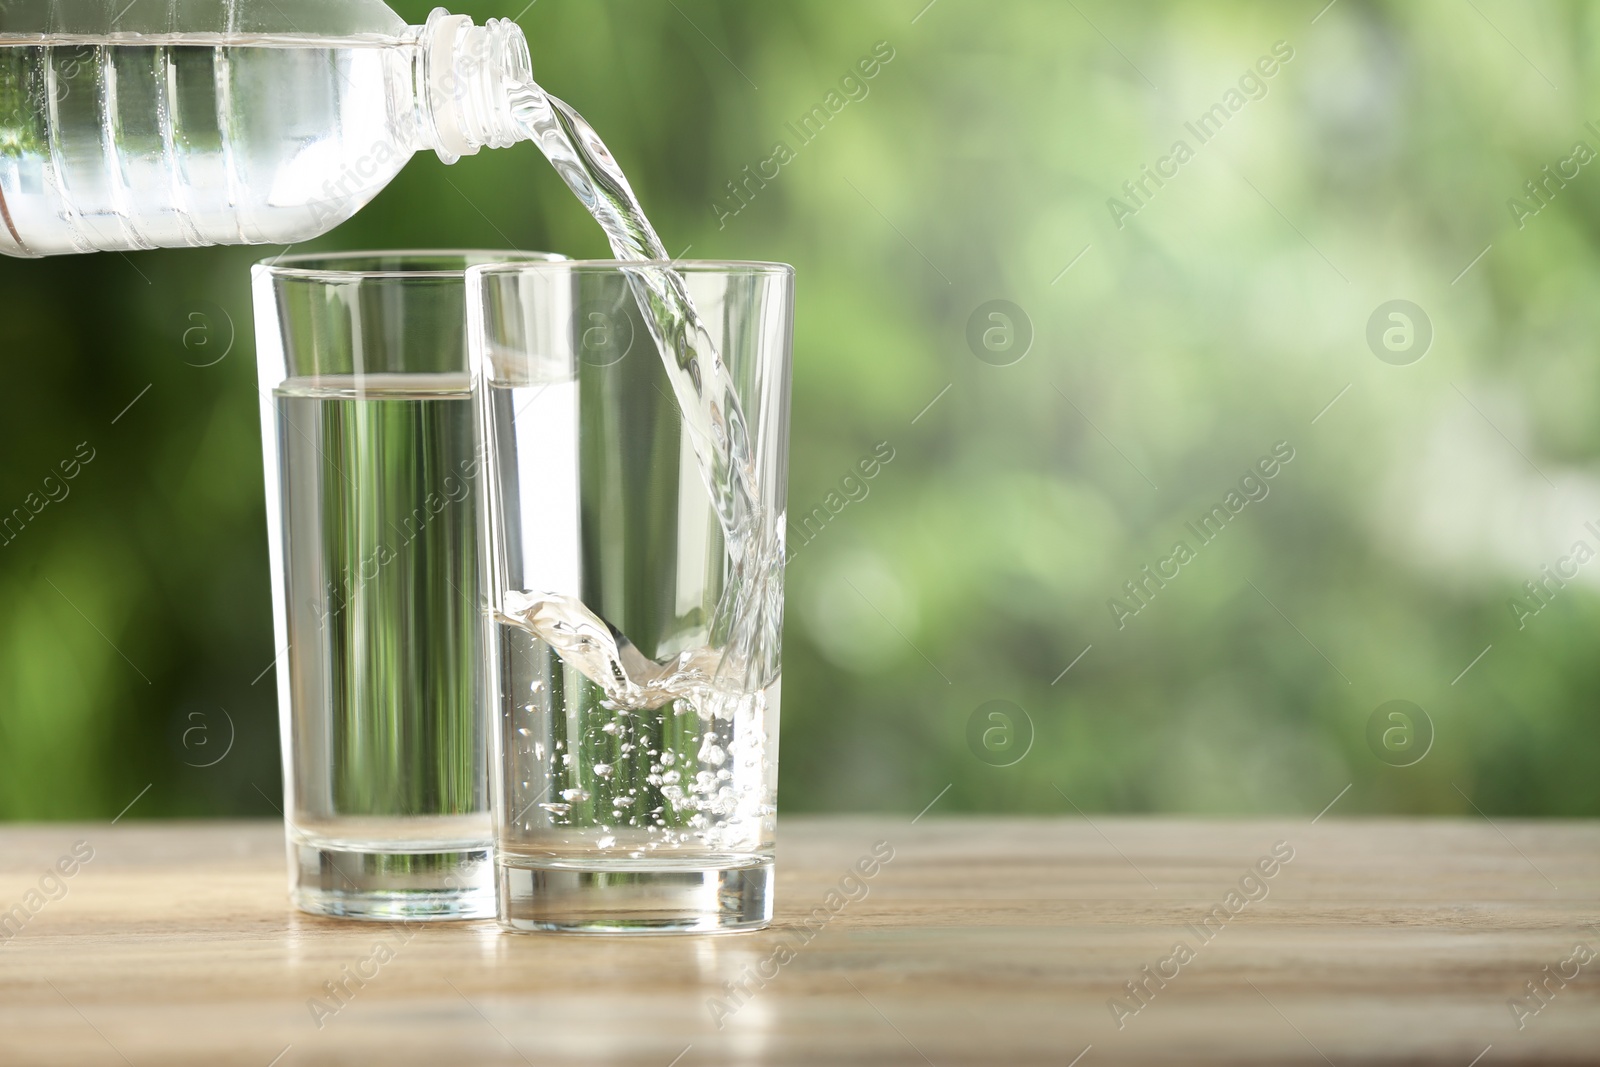 Photo of Pouring water from bottle into glass on wooden table outdoors, space for text